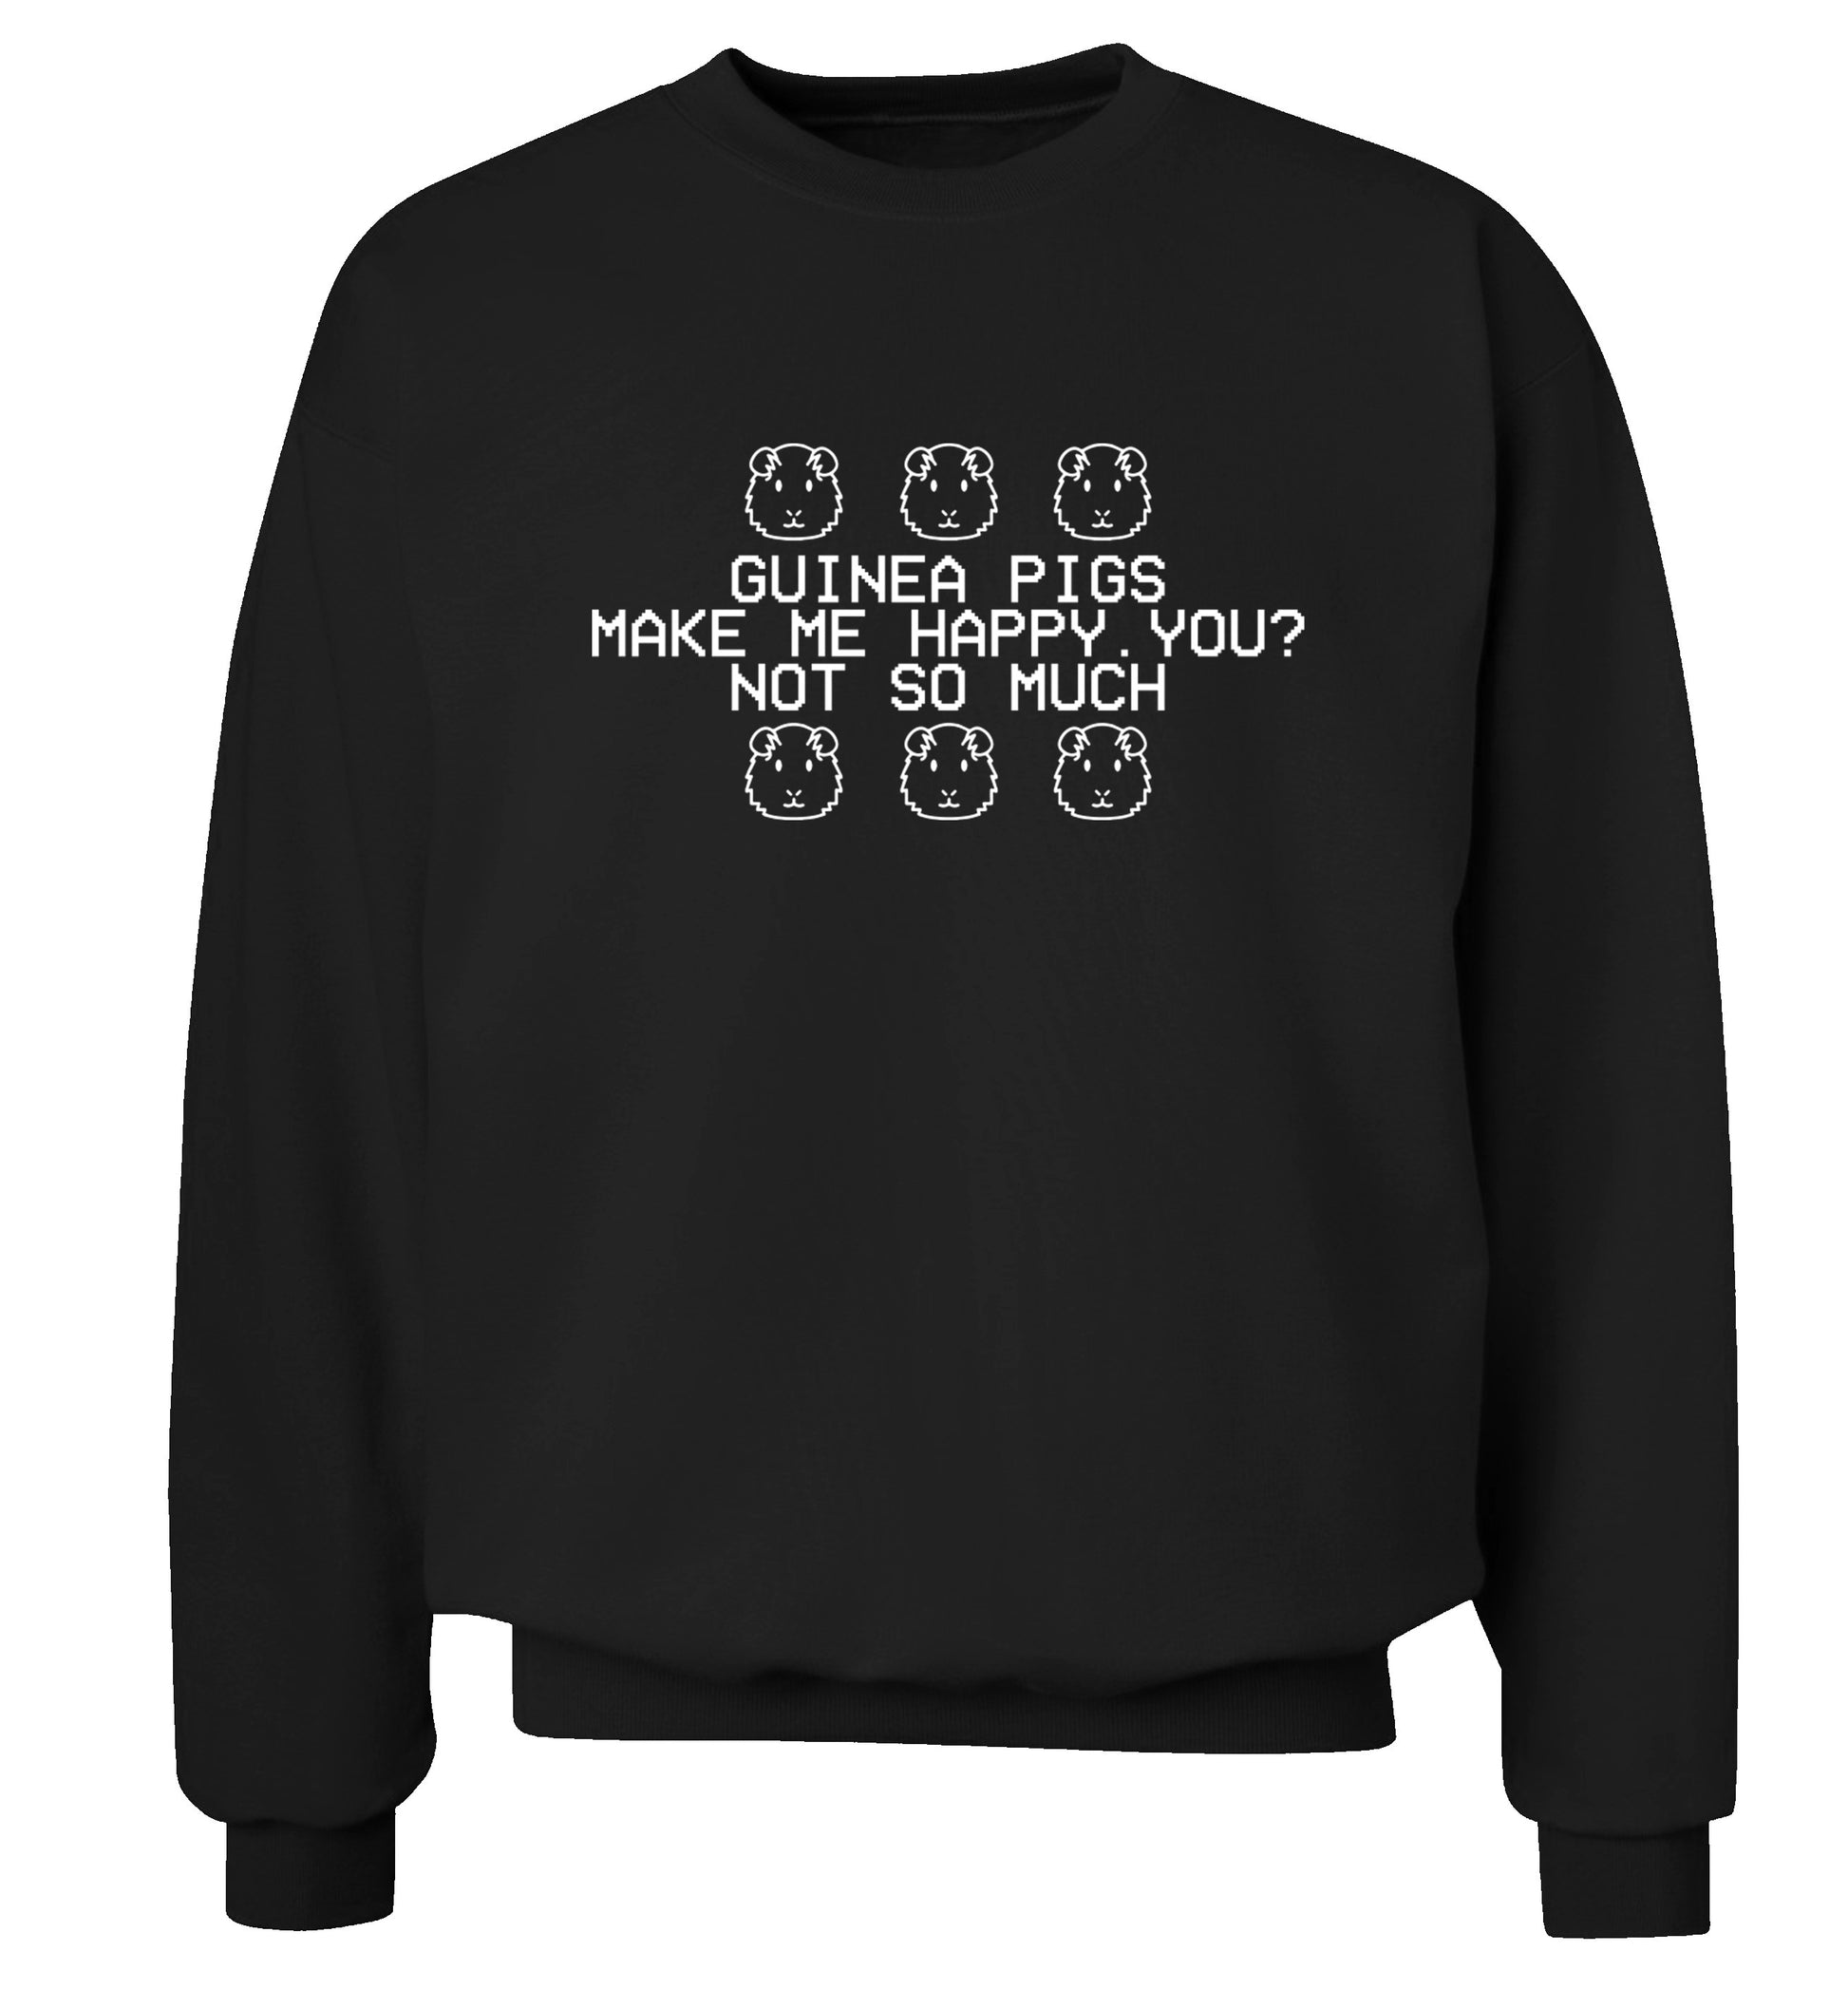 Guinea pigs make me happy, you not so much Adult's unisex black  sweater 2XL